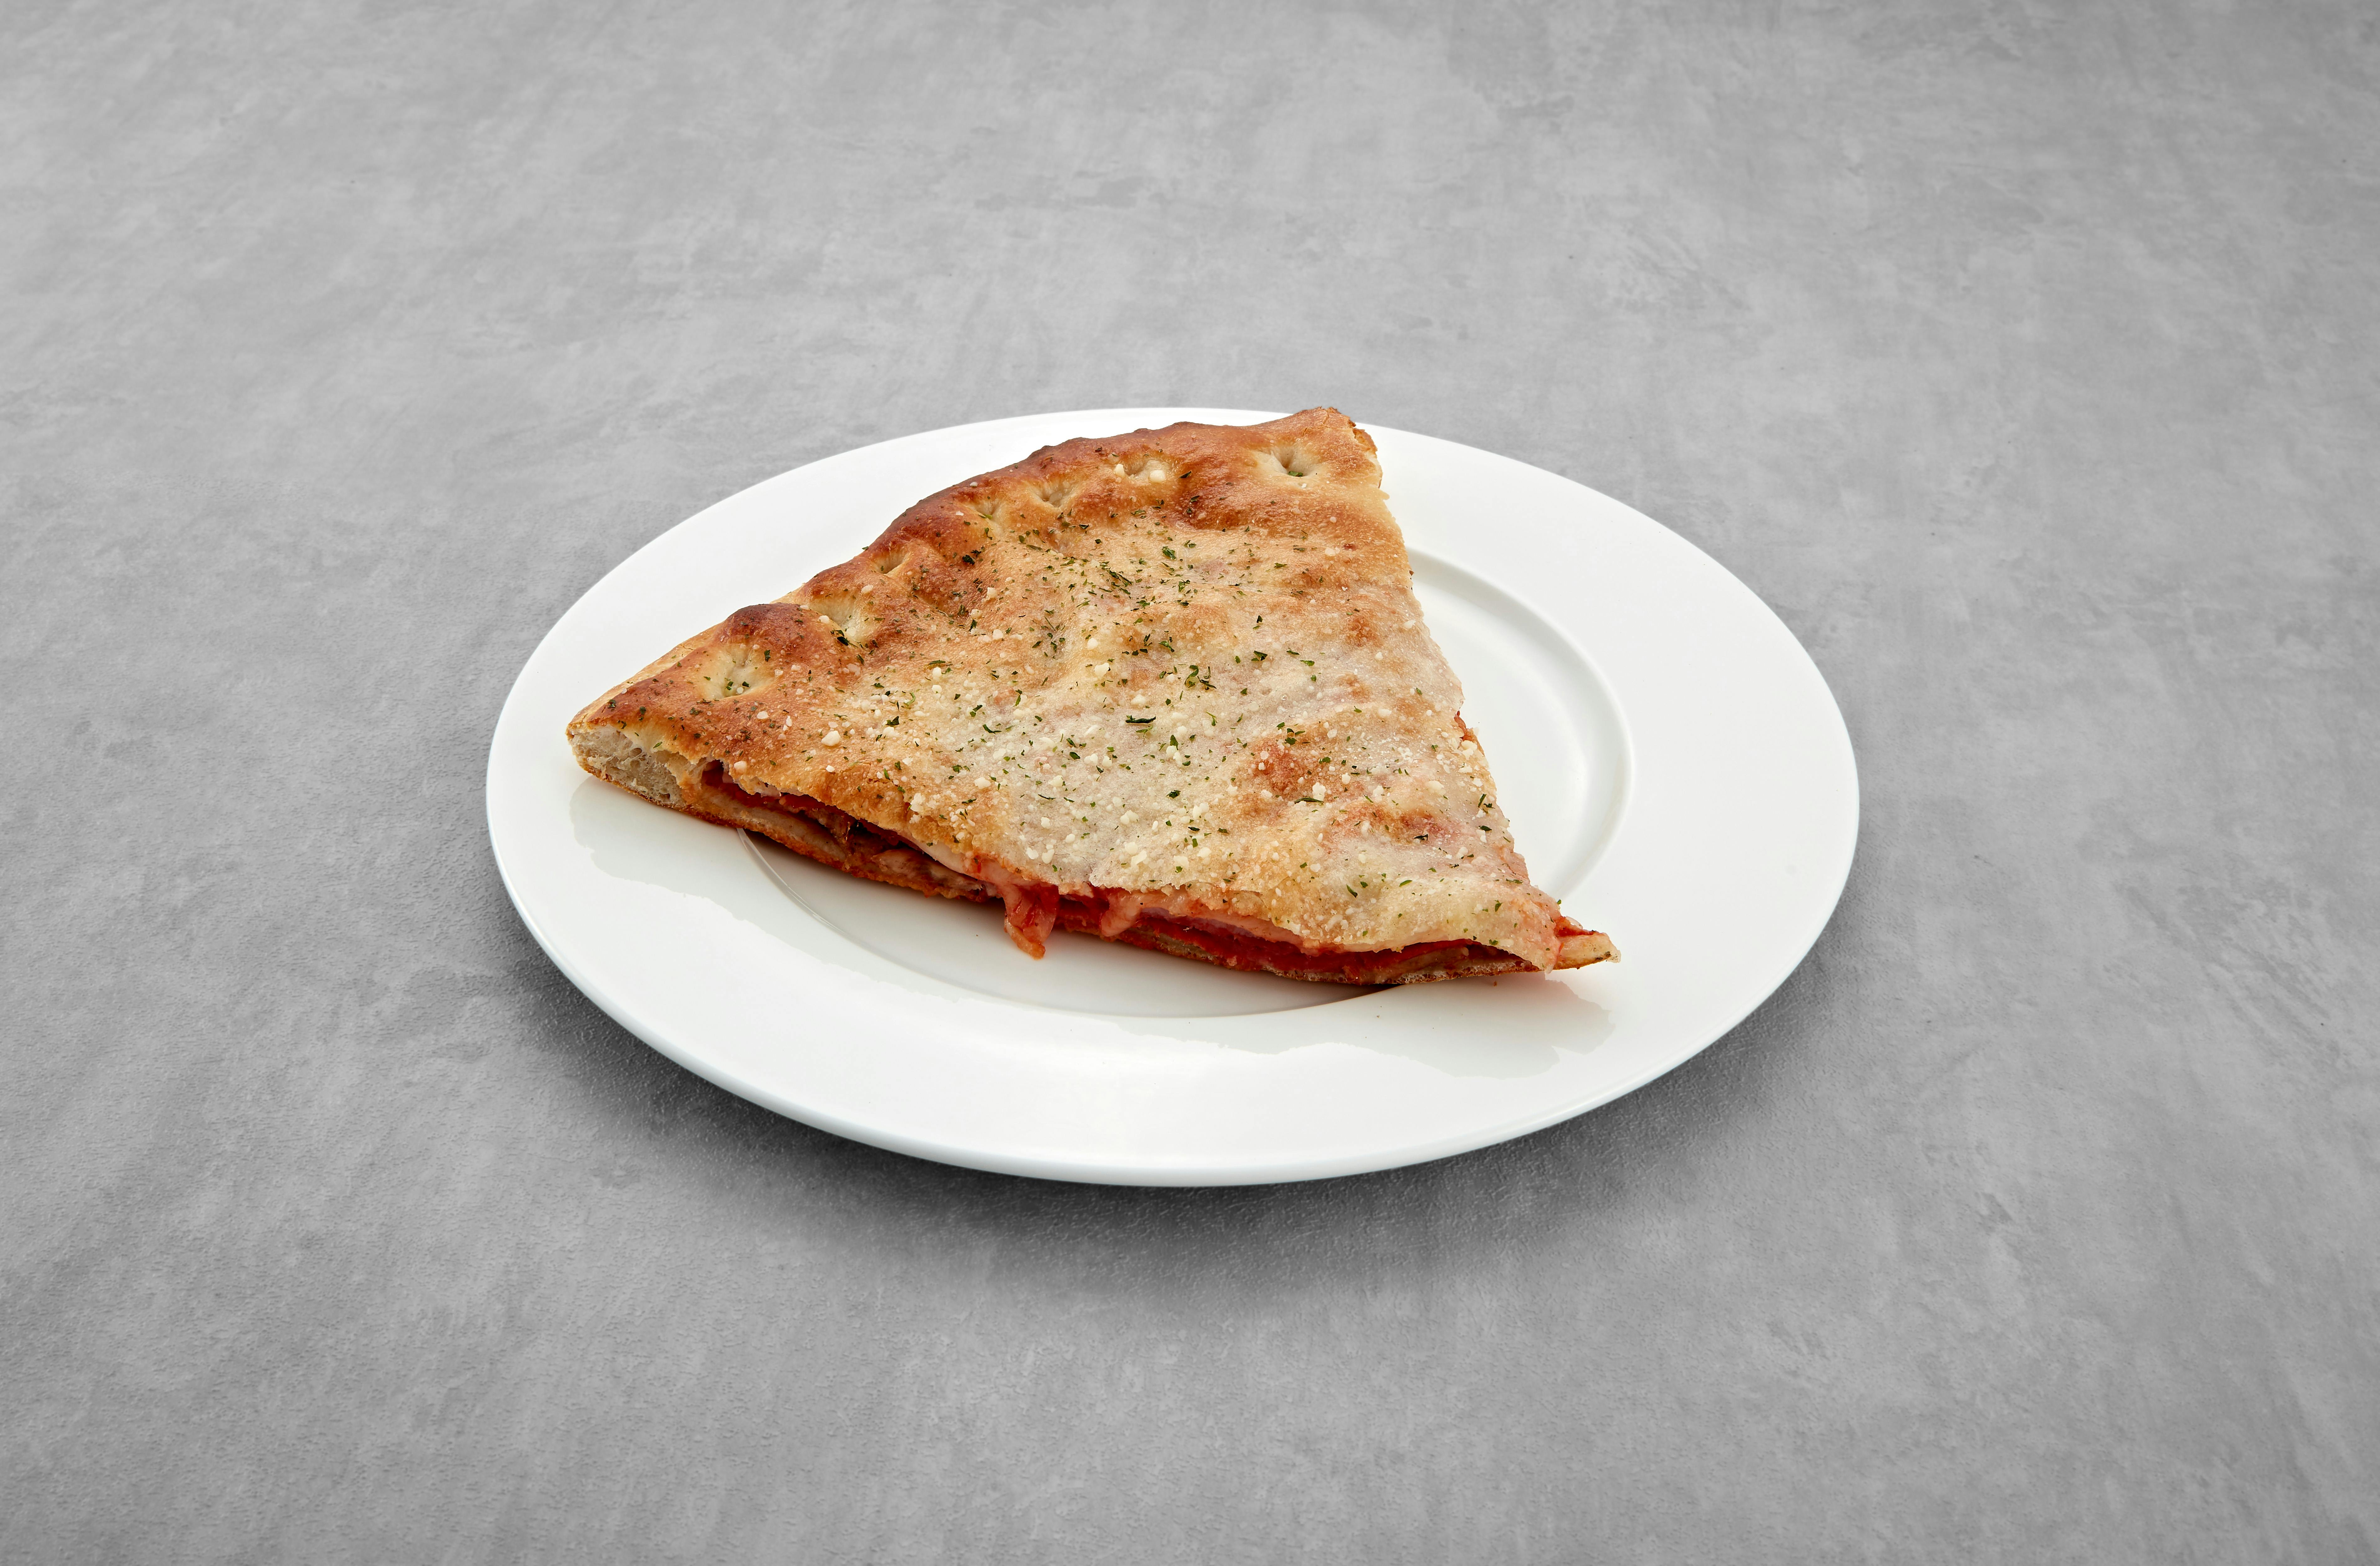 Stuffed Meat Pizza Slice from Mario's Pizzeria in Seaford, NY